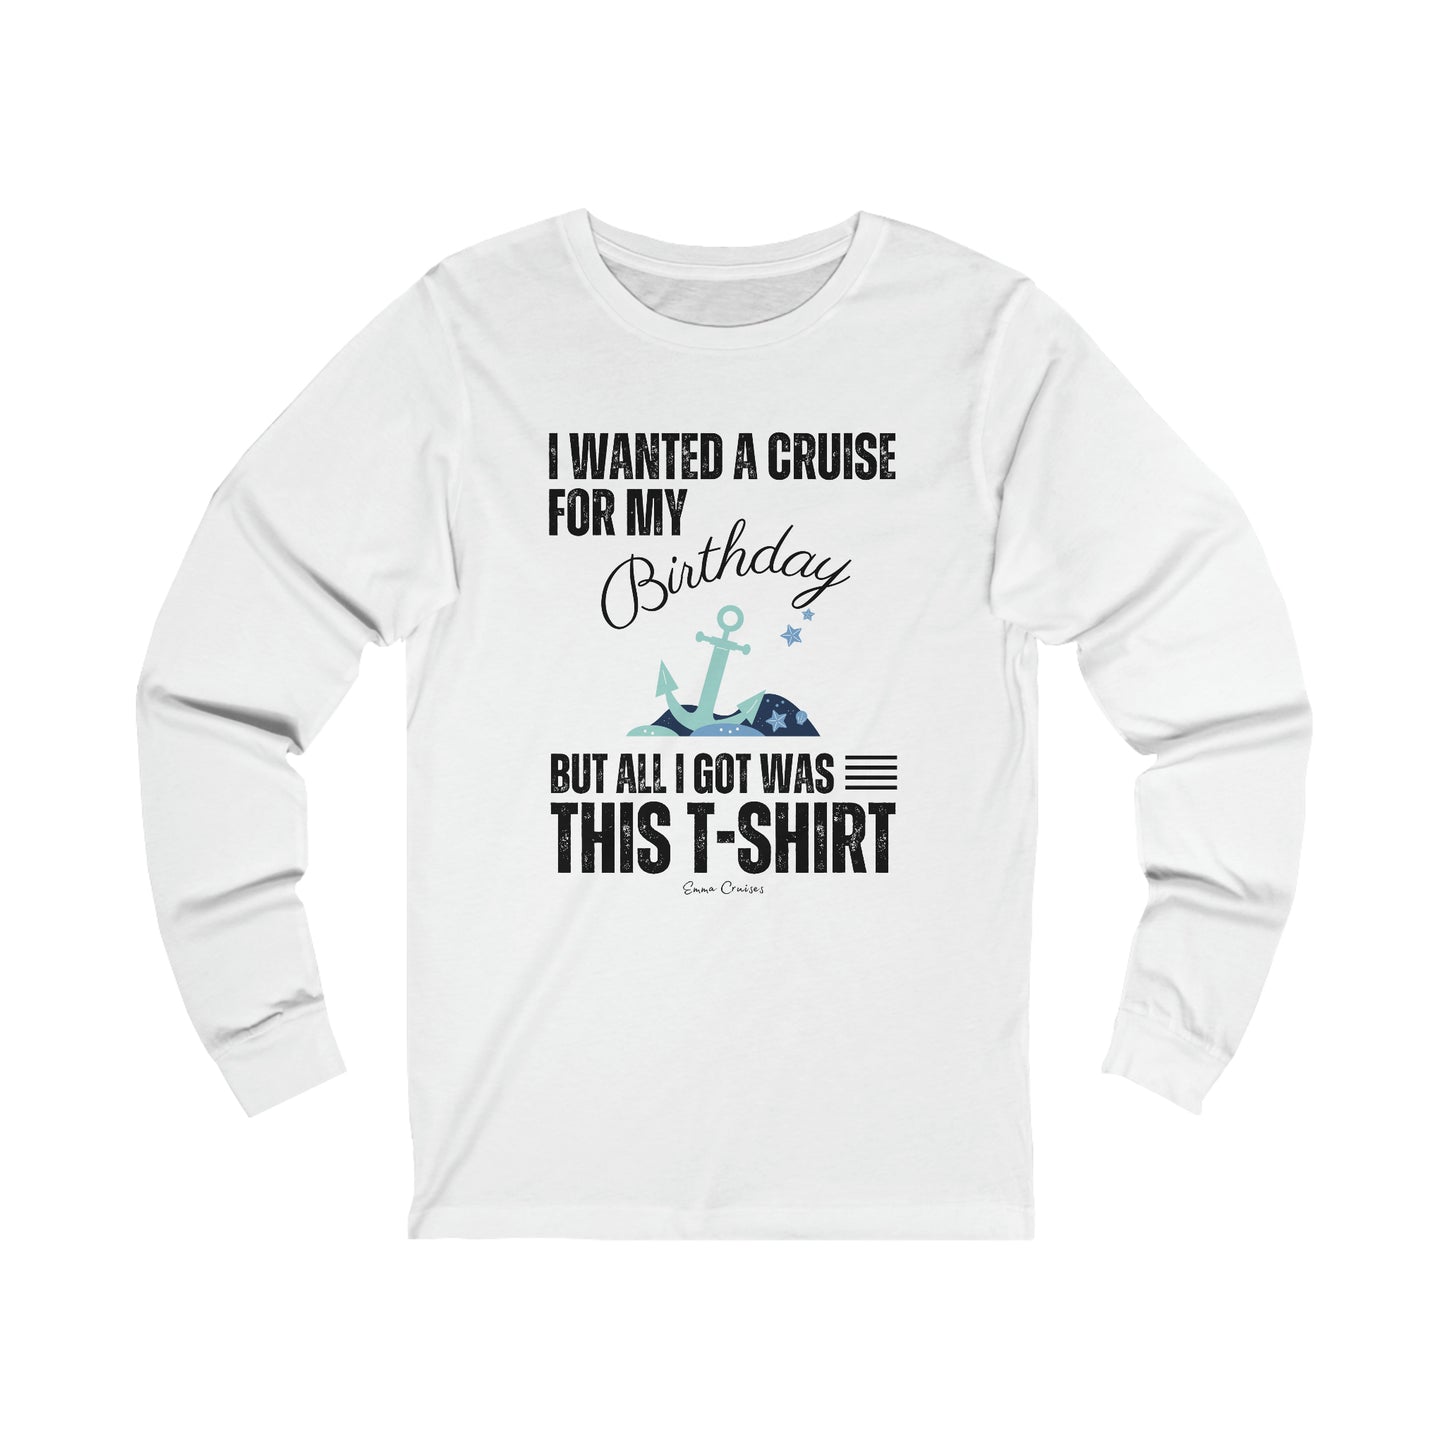 I Wanted a Cruise for My Birthday - UNISEX T-Shirt